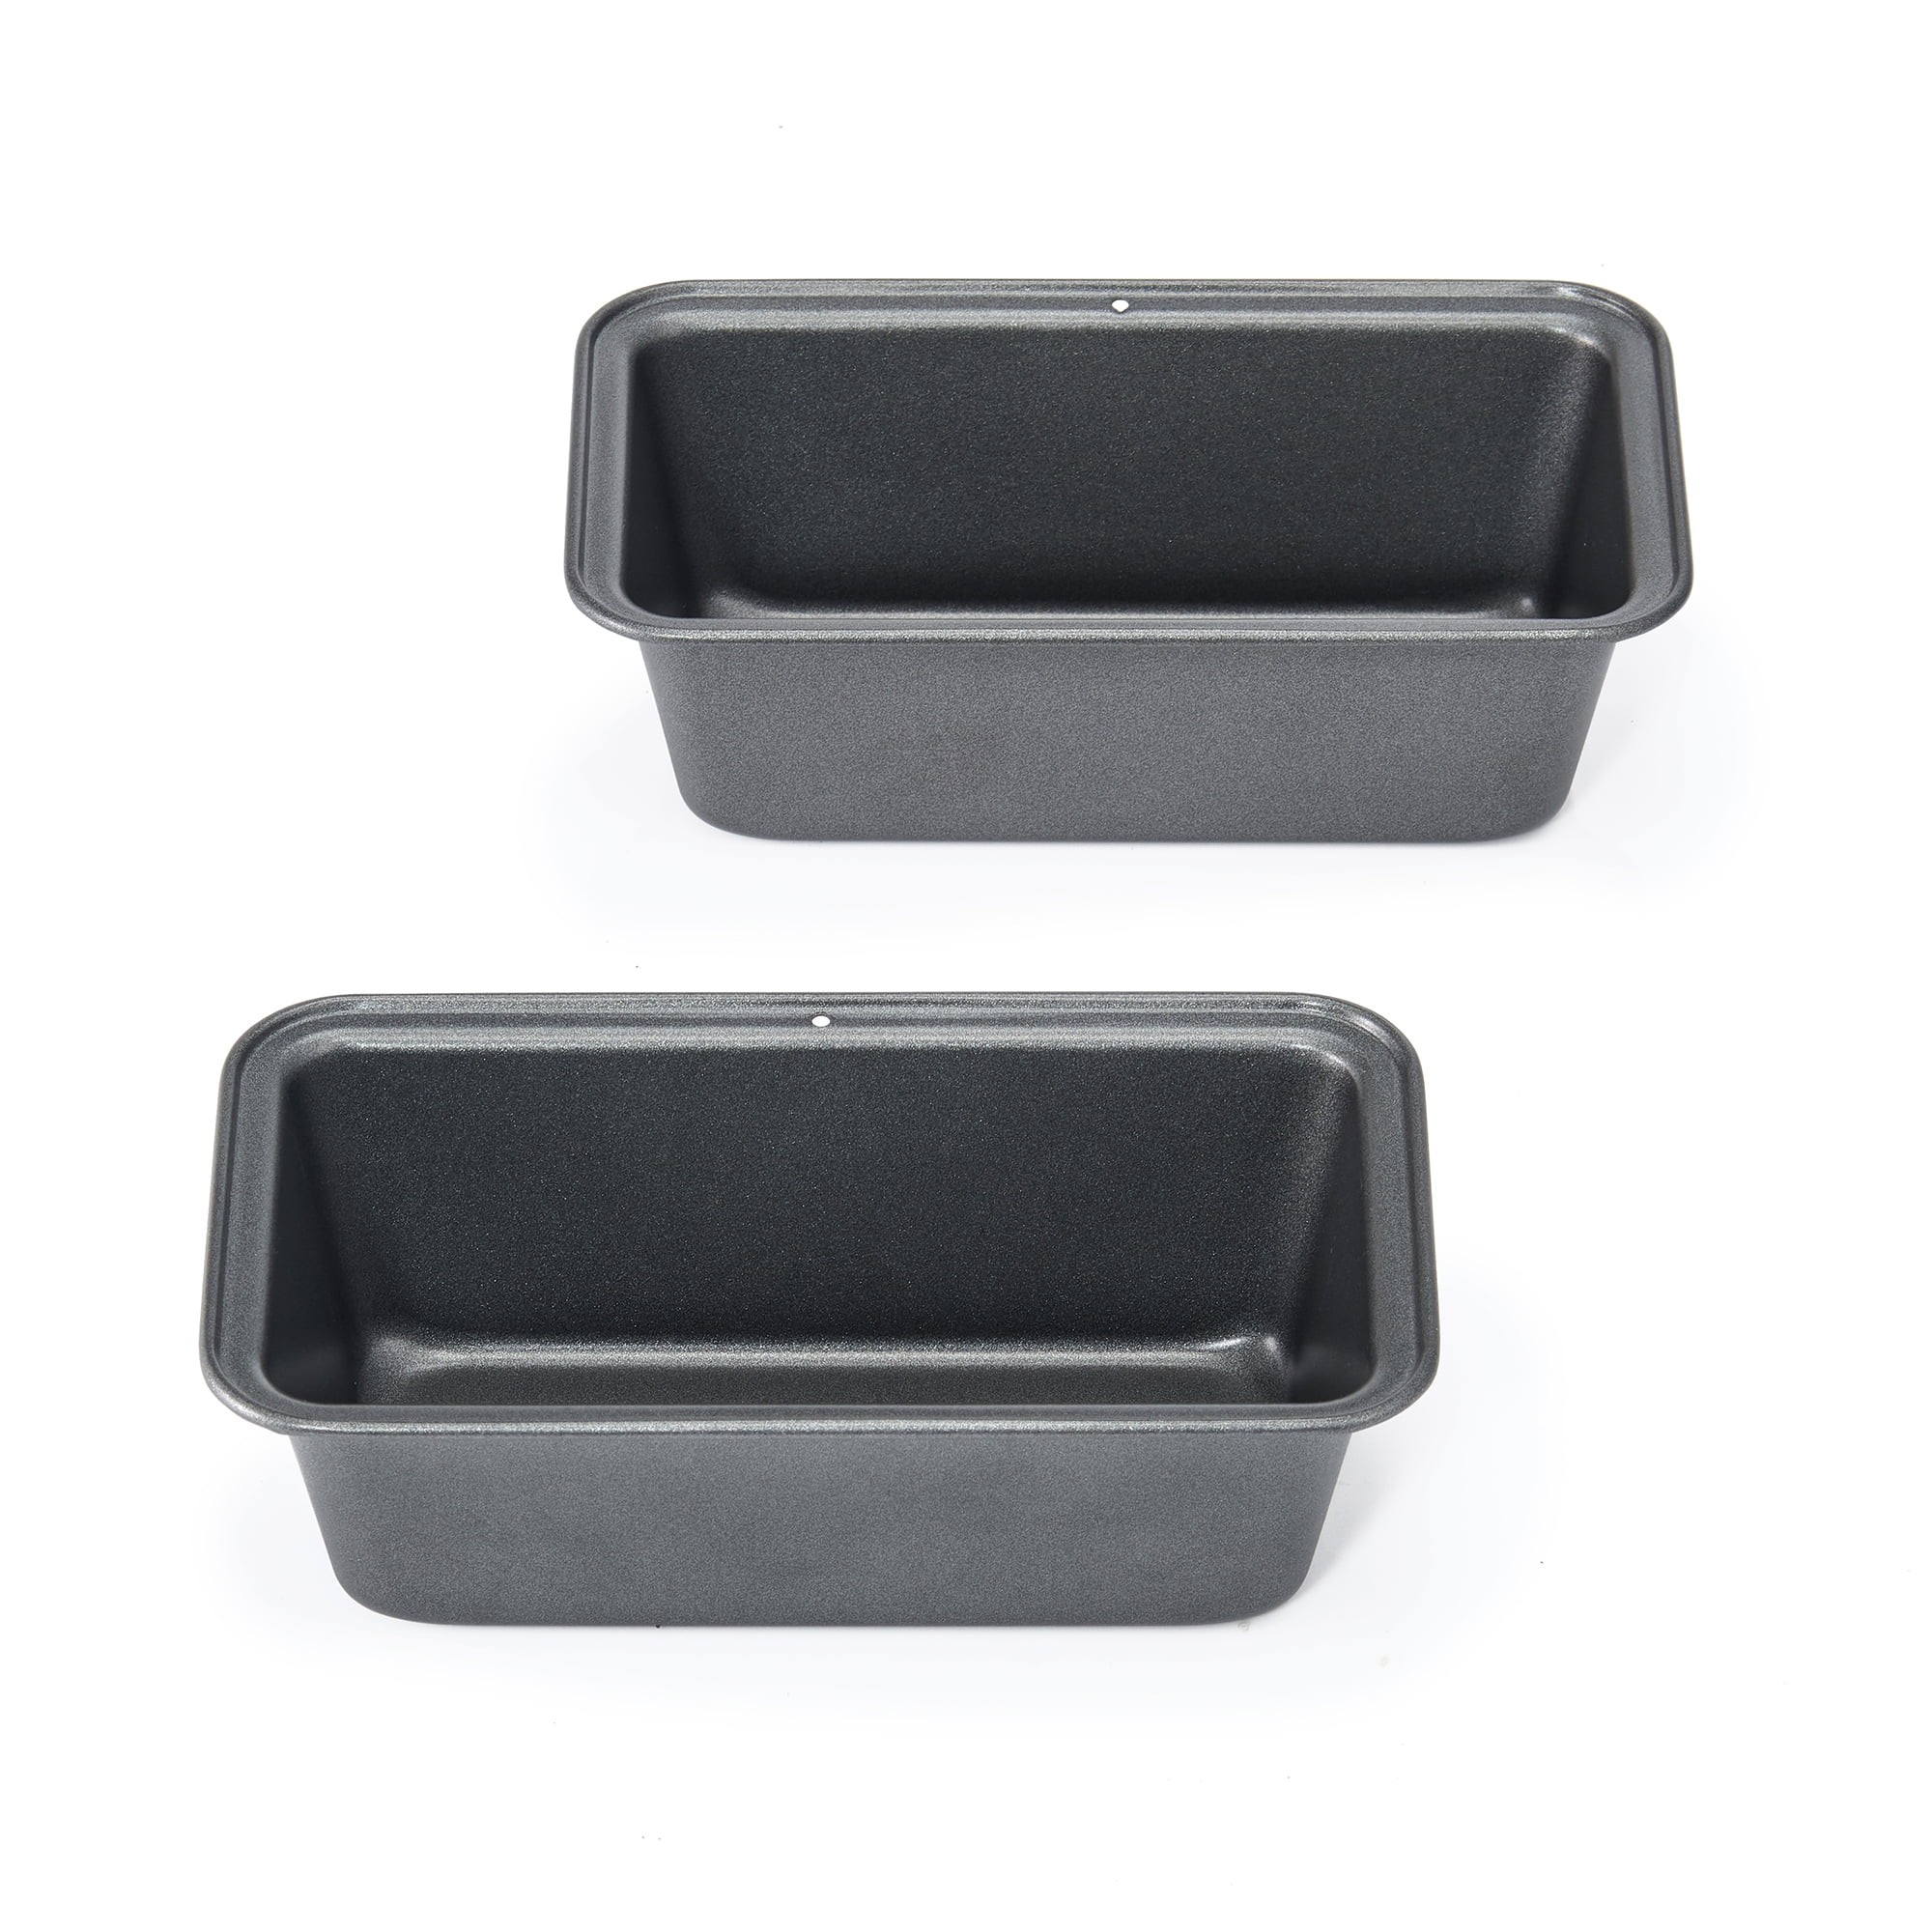 HONGBAKE Mini Loaf Pan for Baking Bread, 6 x 3.3 x 2 In Nonstick Small  Banana Bread Tins Set of 3, Tiny Carbon Steel Meatloaf Pan - Dark Grey